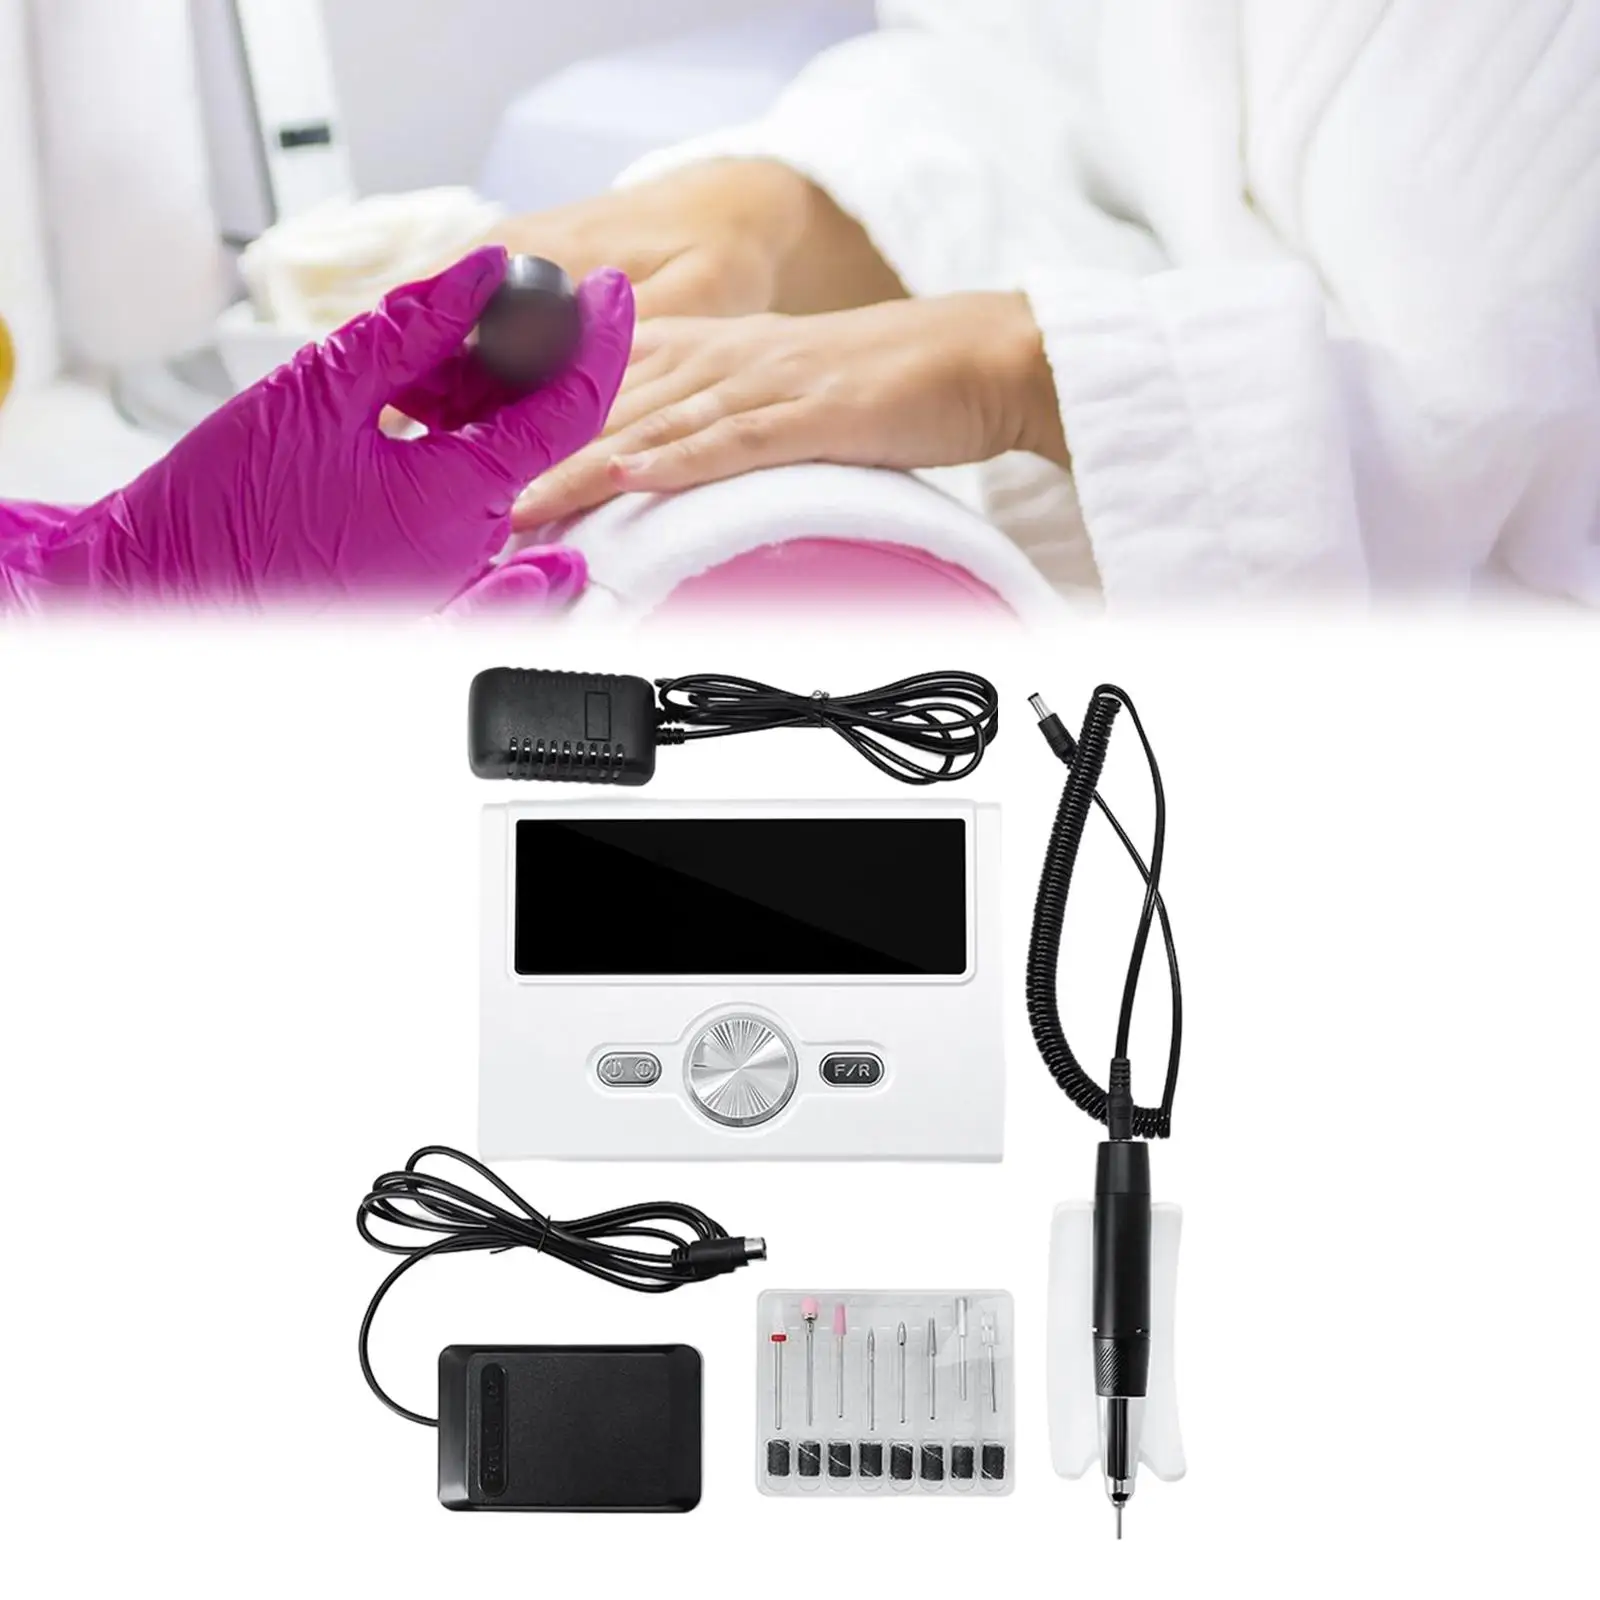 Machine, Portable Adjustable Speed, with LED Display, Polishing , Electric Nail File Machine, for Acrylic Nails Salon Home